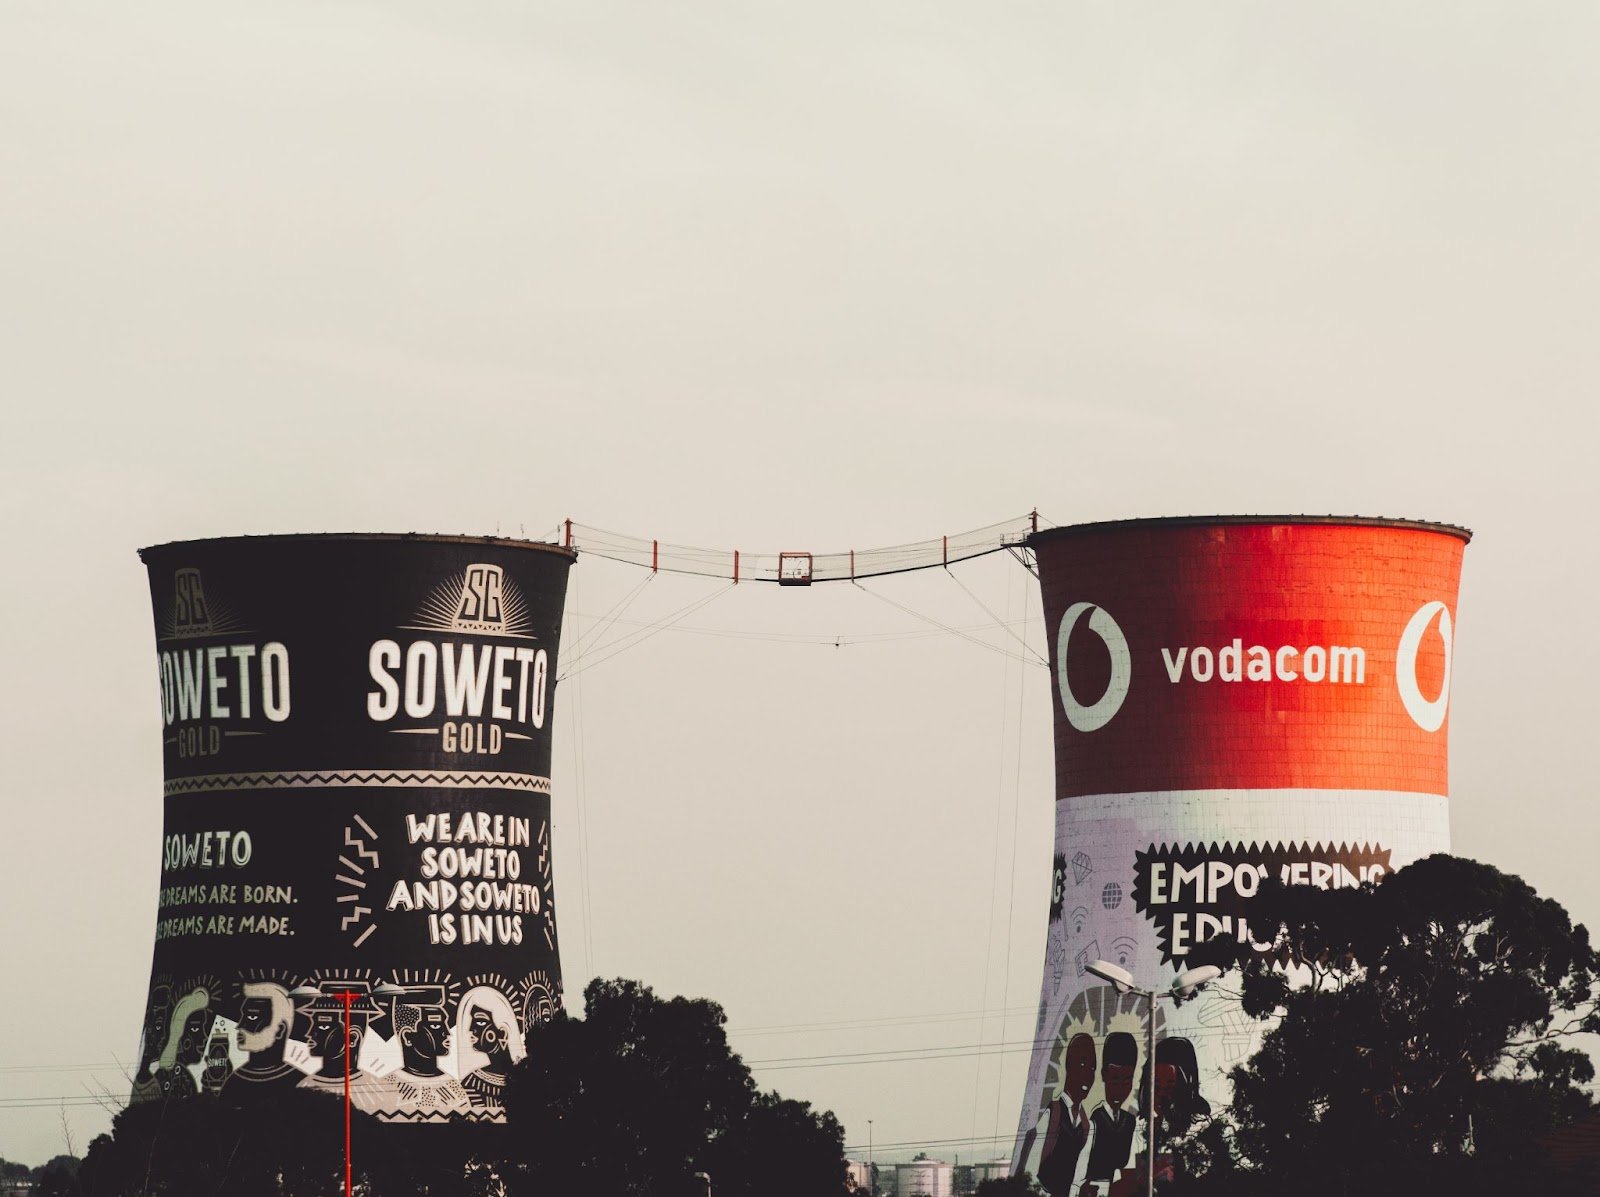 The famous Soweto Towers, a powerful backdrop to the popular Vilakazi Street, Soweto